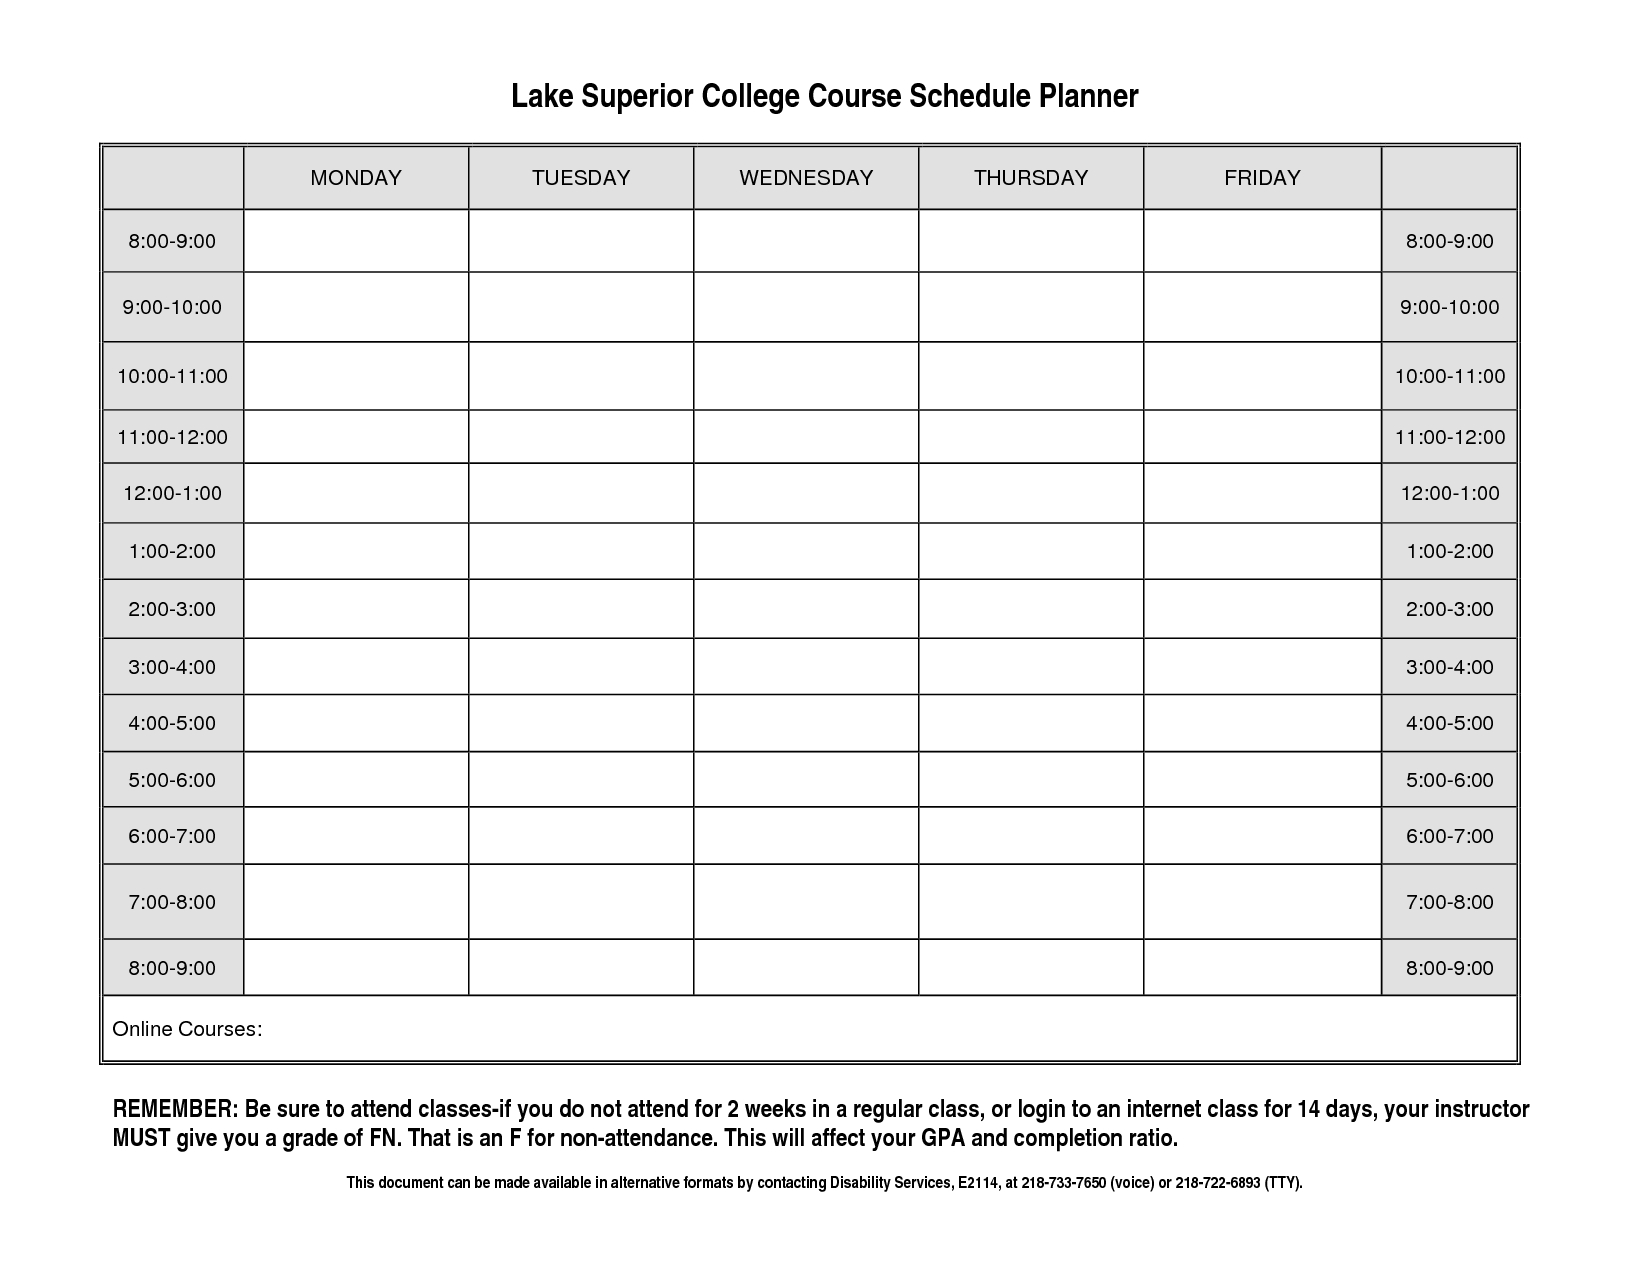 Schedule Worksheet Templates | Printable Worksheets And in Printable 15 Min. Appointment Sheet 8-6